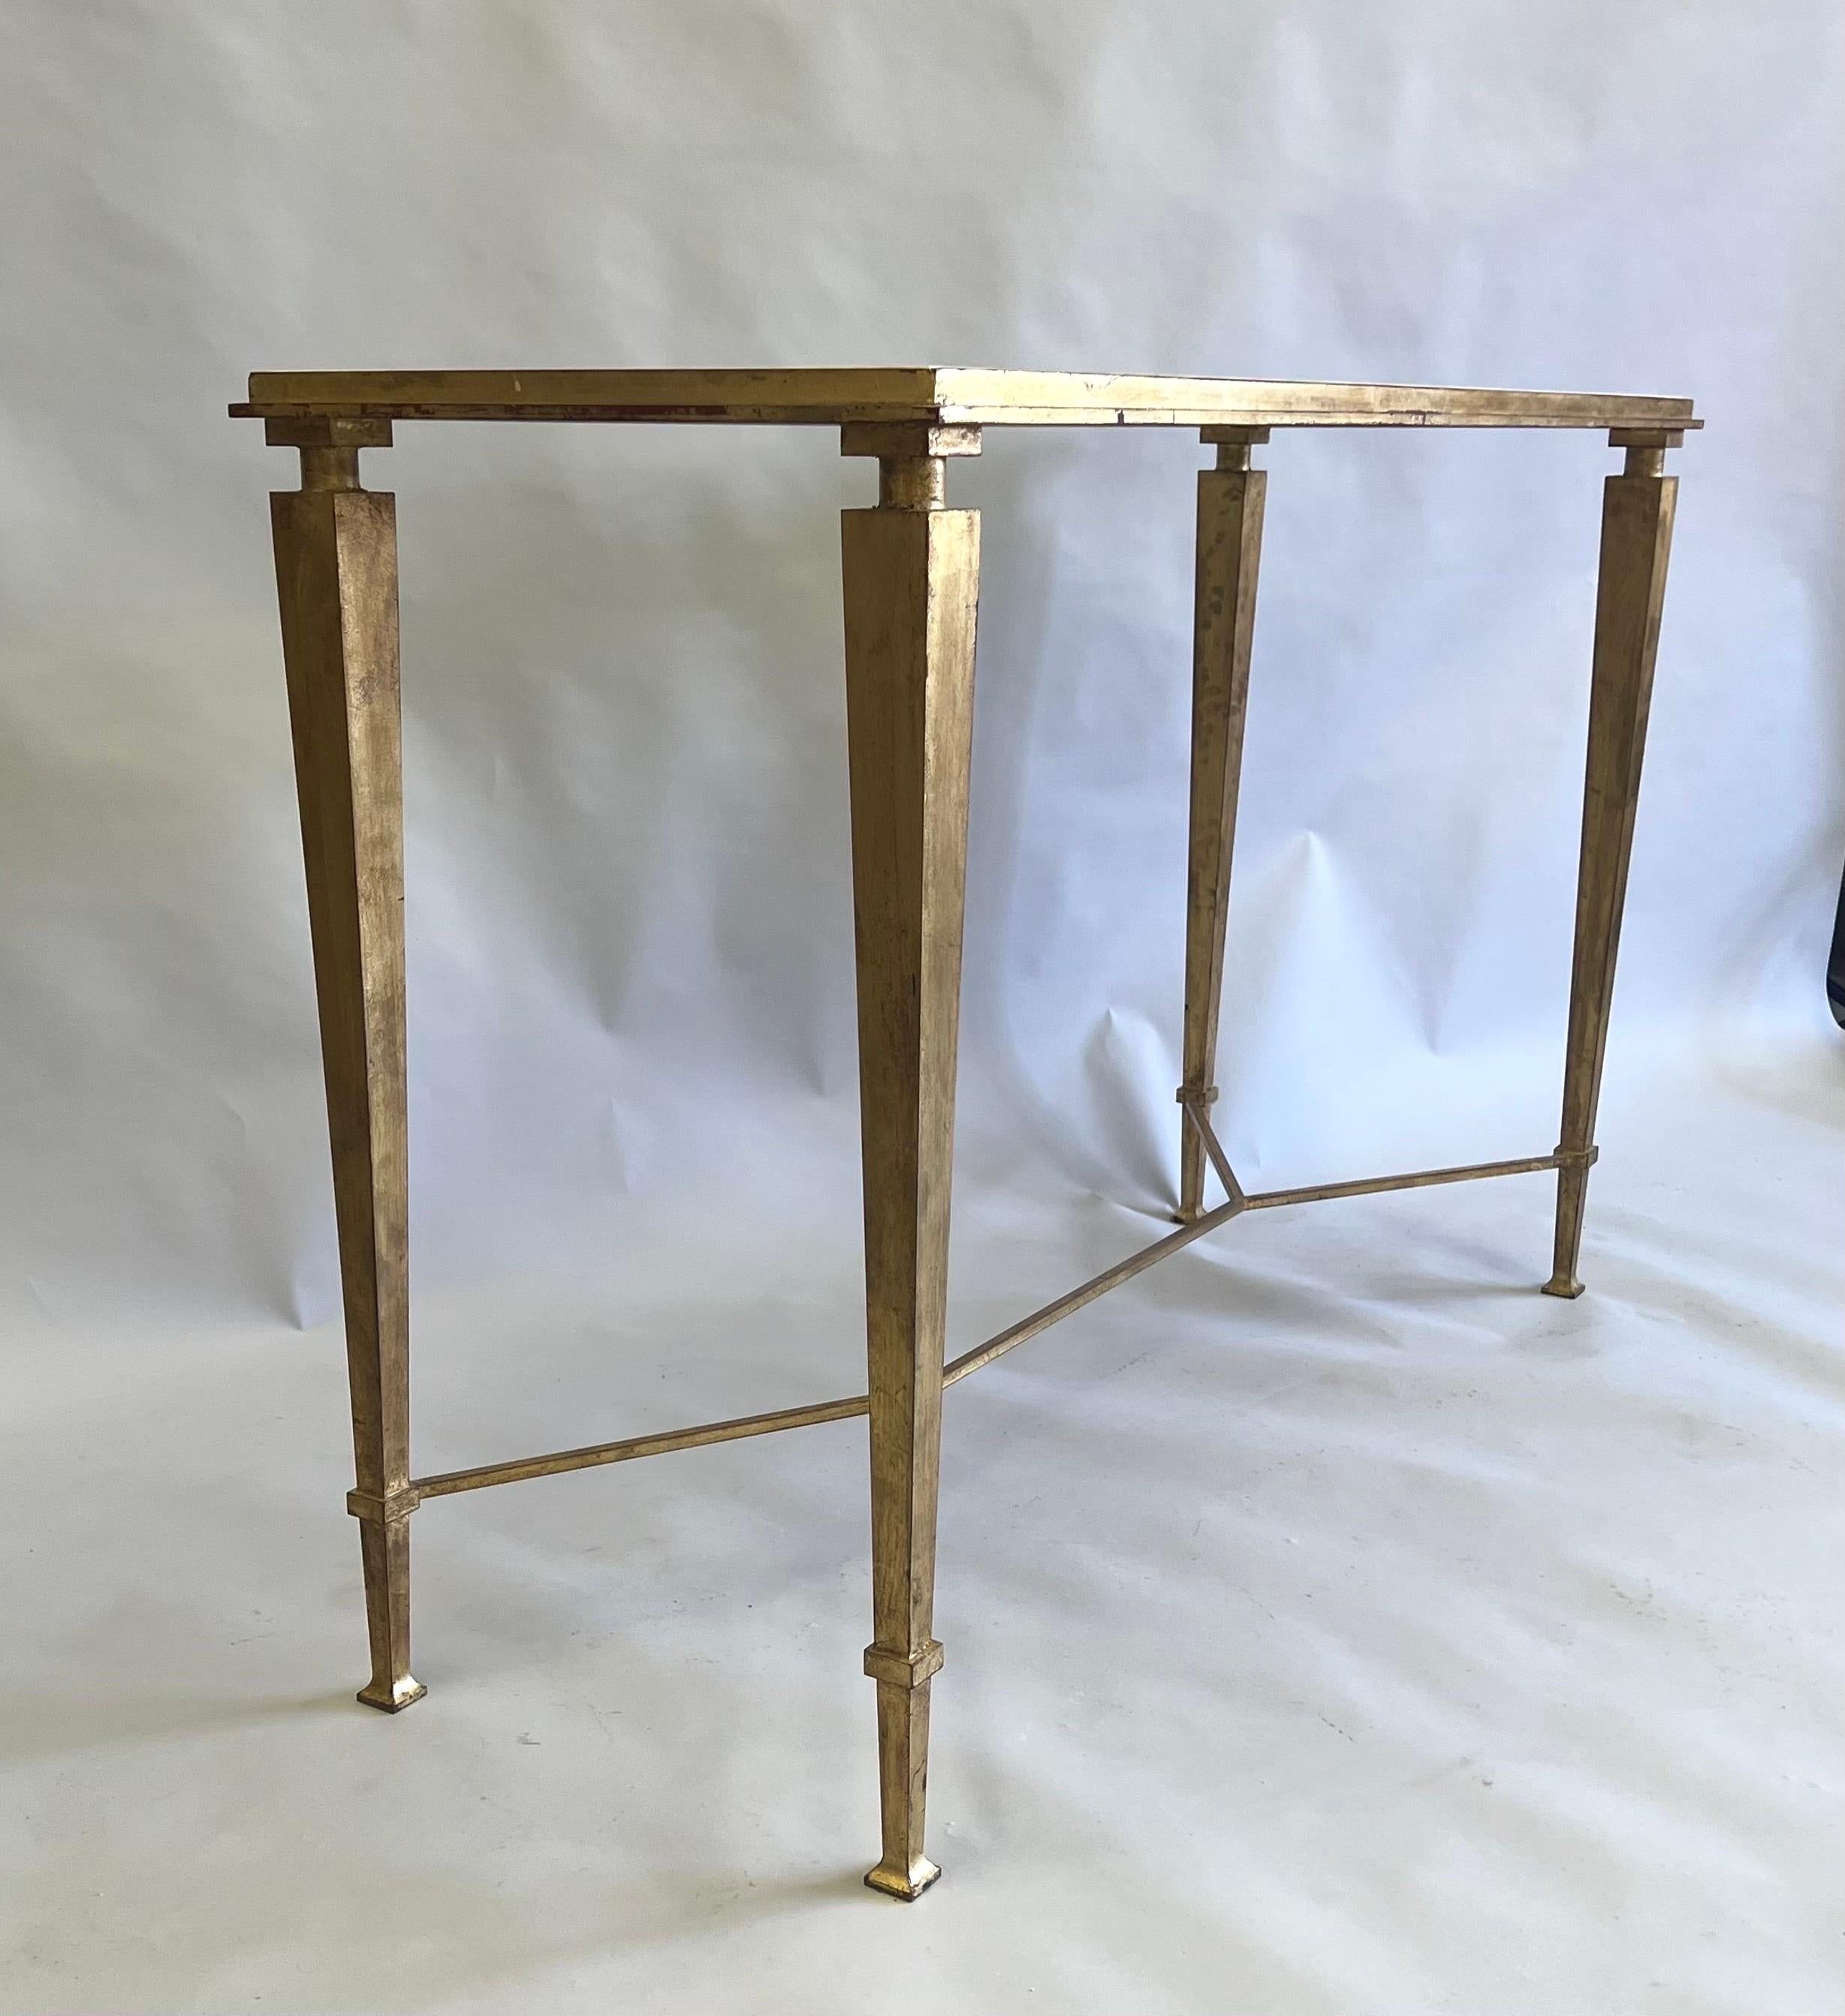 Patinated French Modern Neoclassical Gilt Iron Console, Andre Arbus and Gilbert Poillerat For Sale